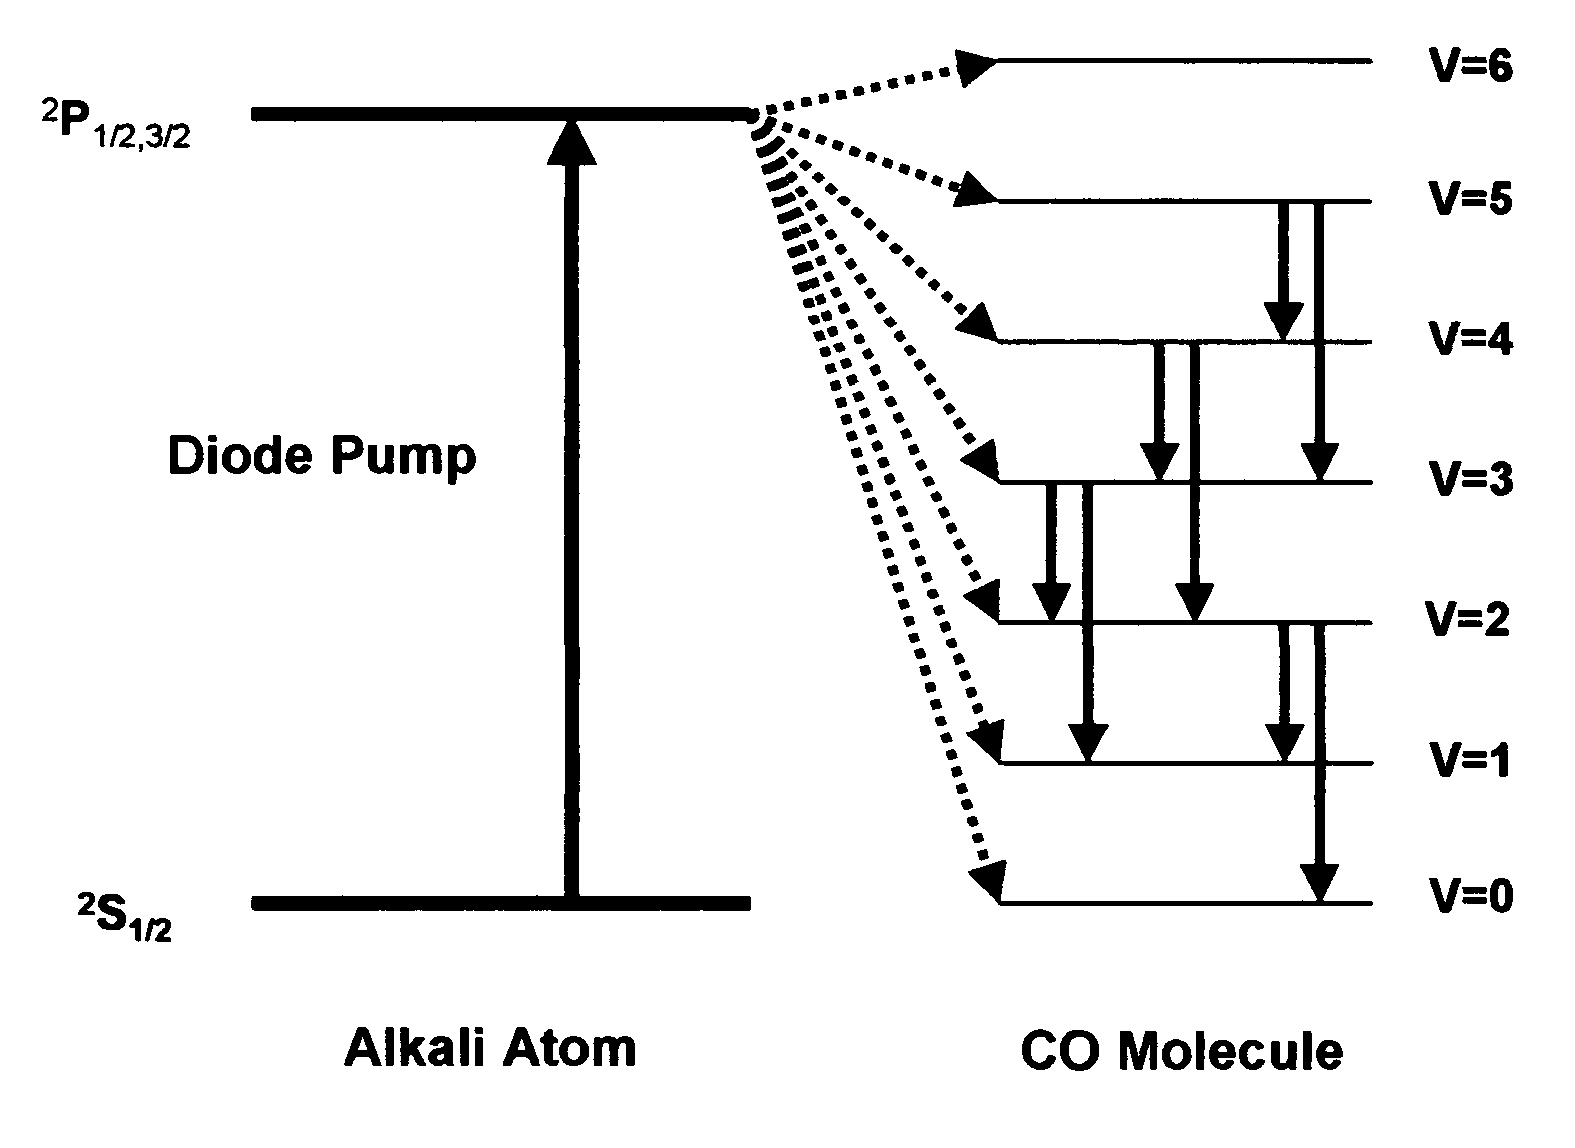 Diode pumped alkali-molecular lasers and amplifiers